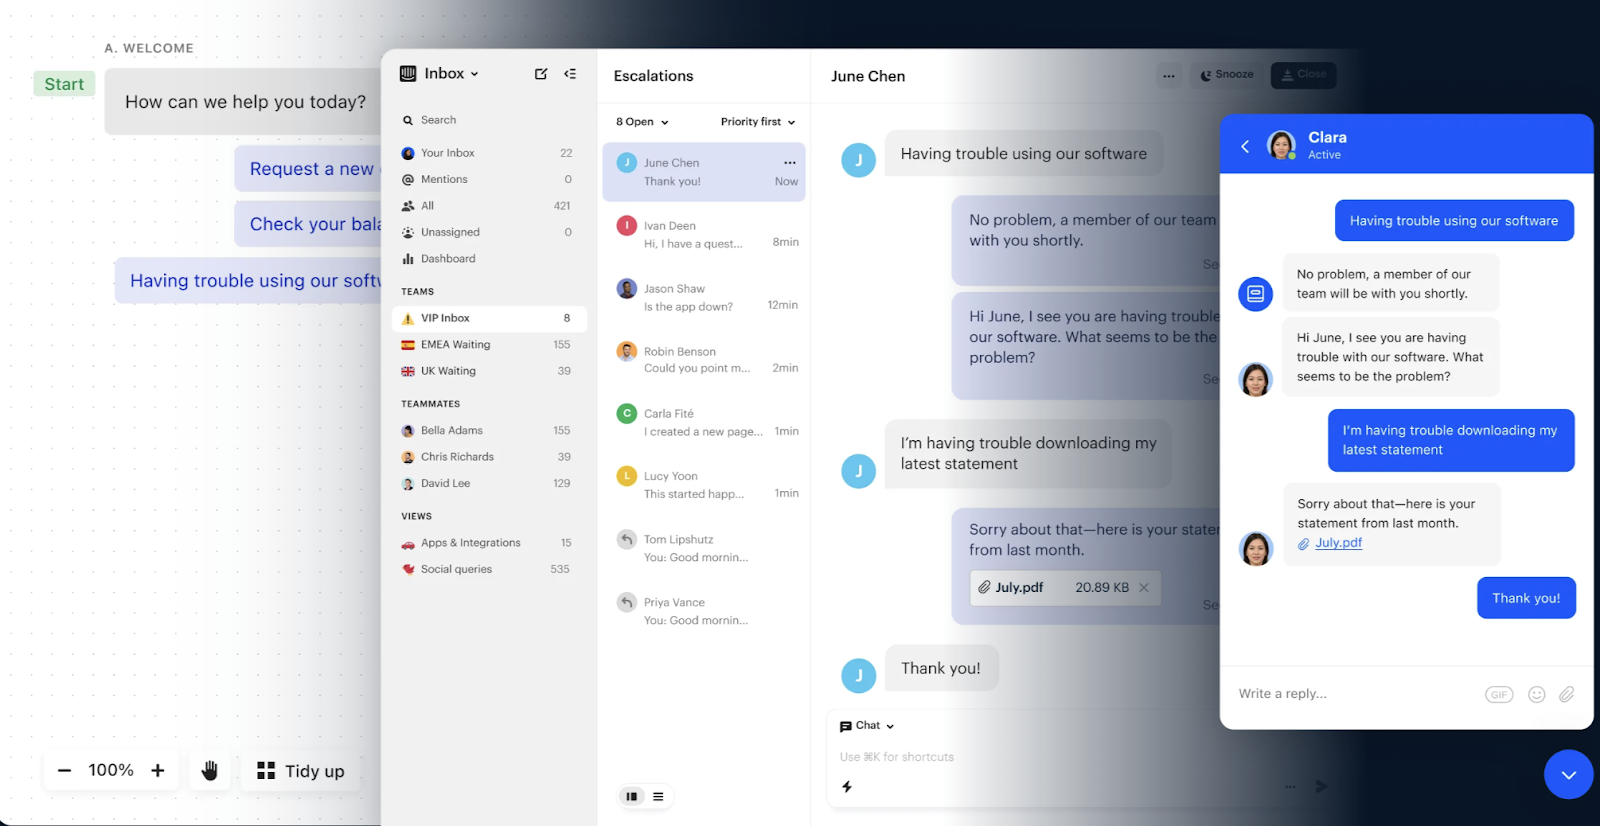 Image displaying the Intercom chat interface, a customer communication platform that serves as one of the Freshdesk alternatives.